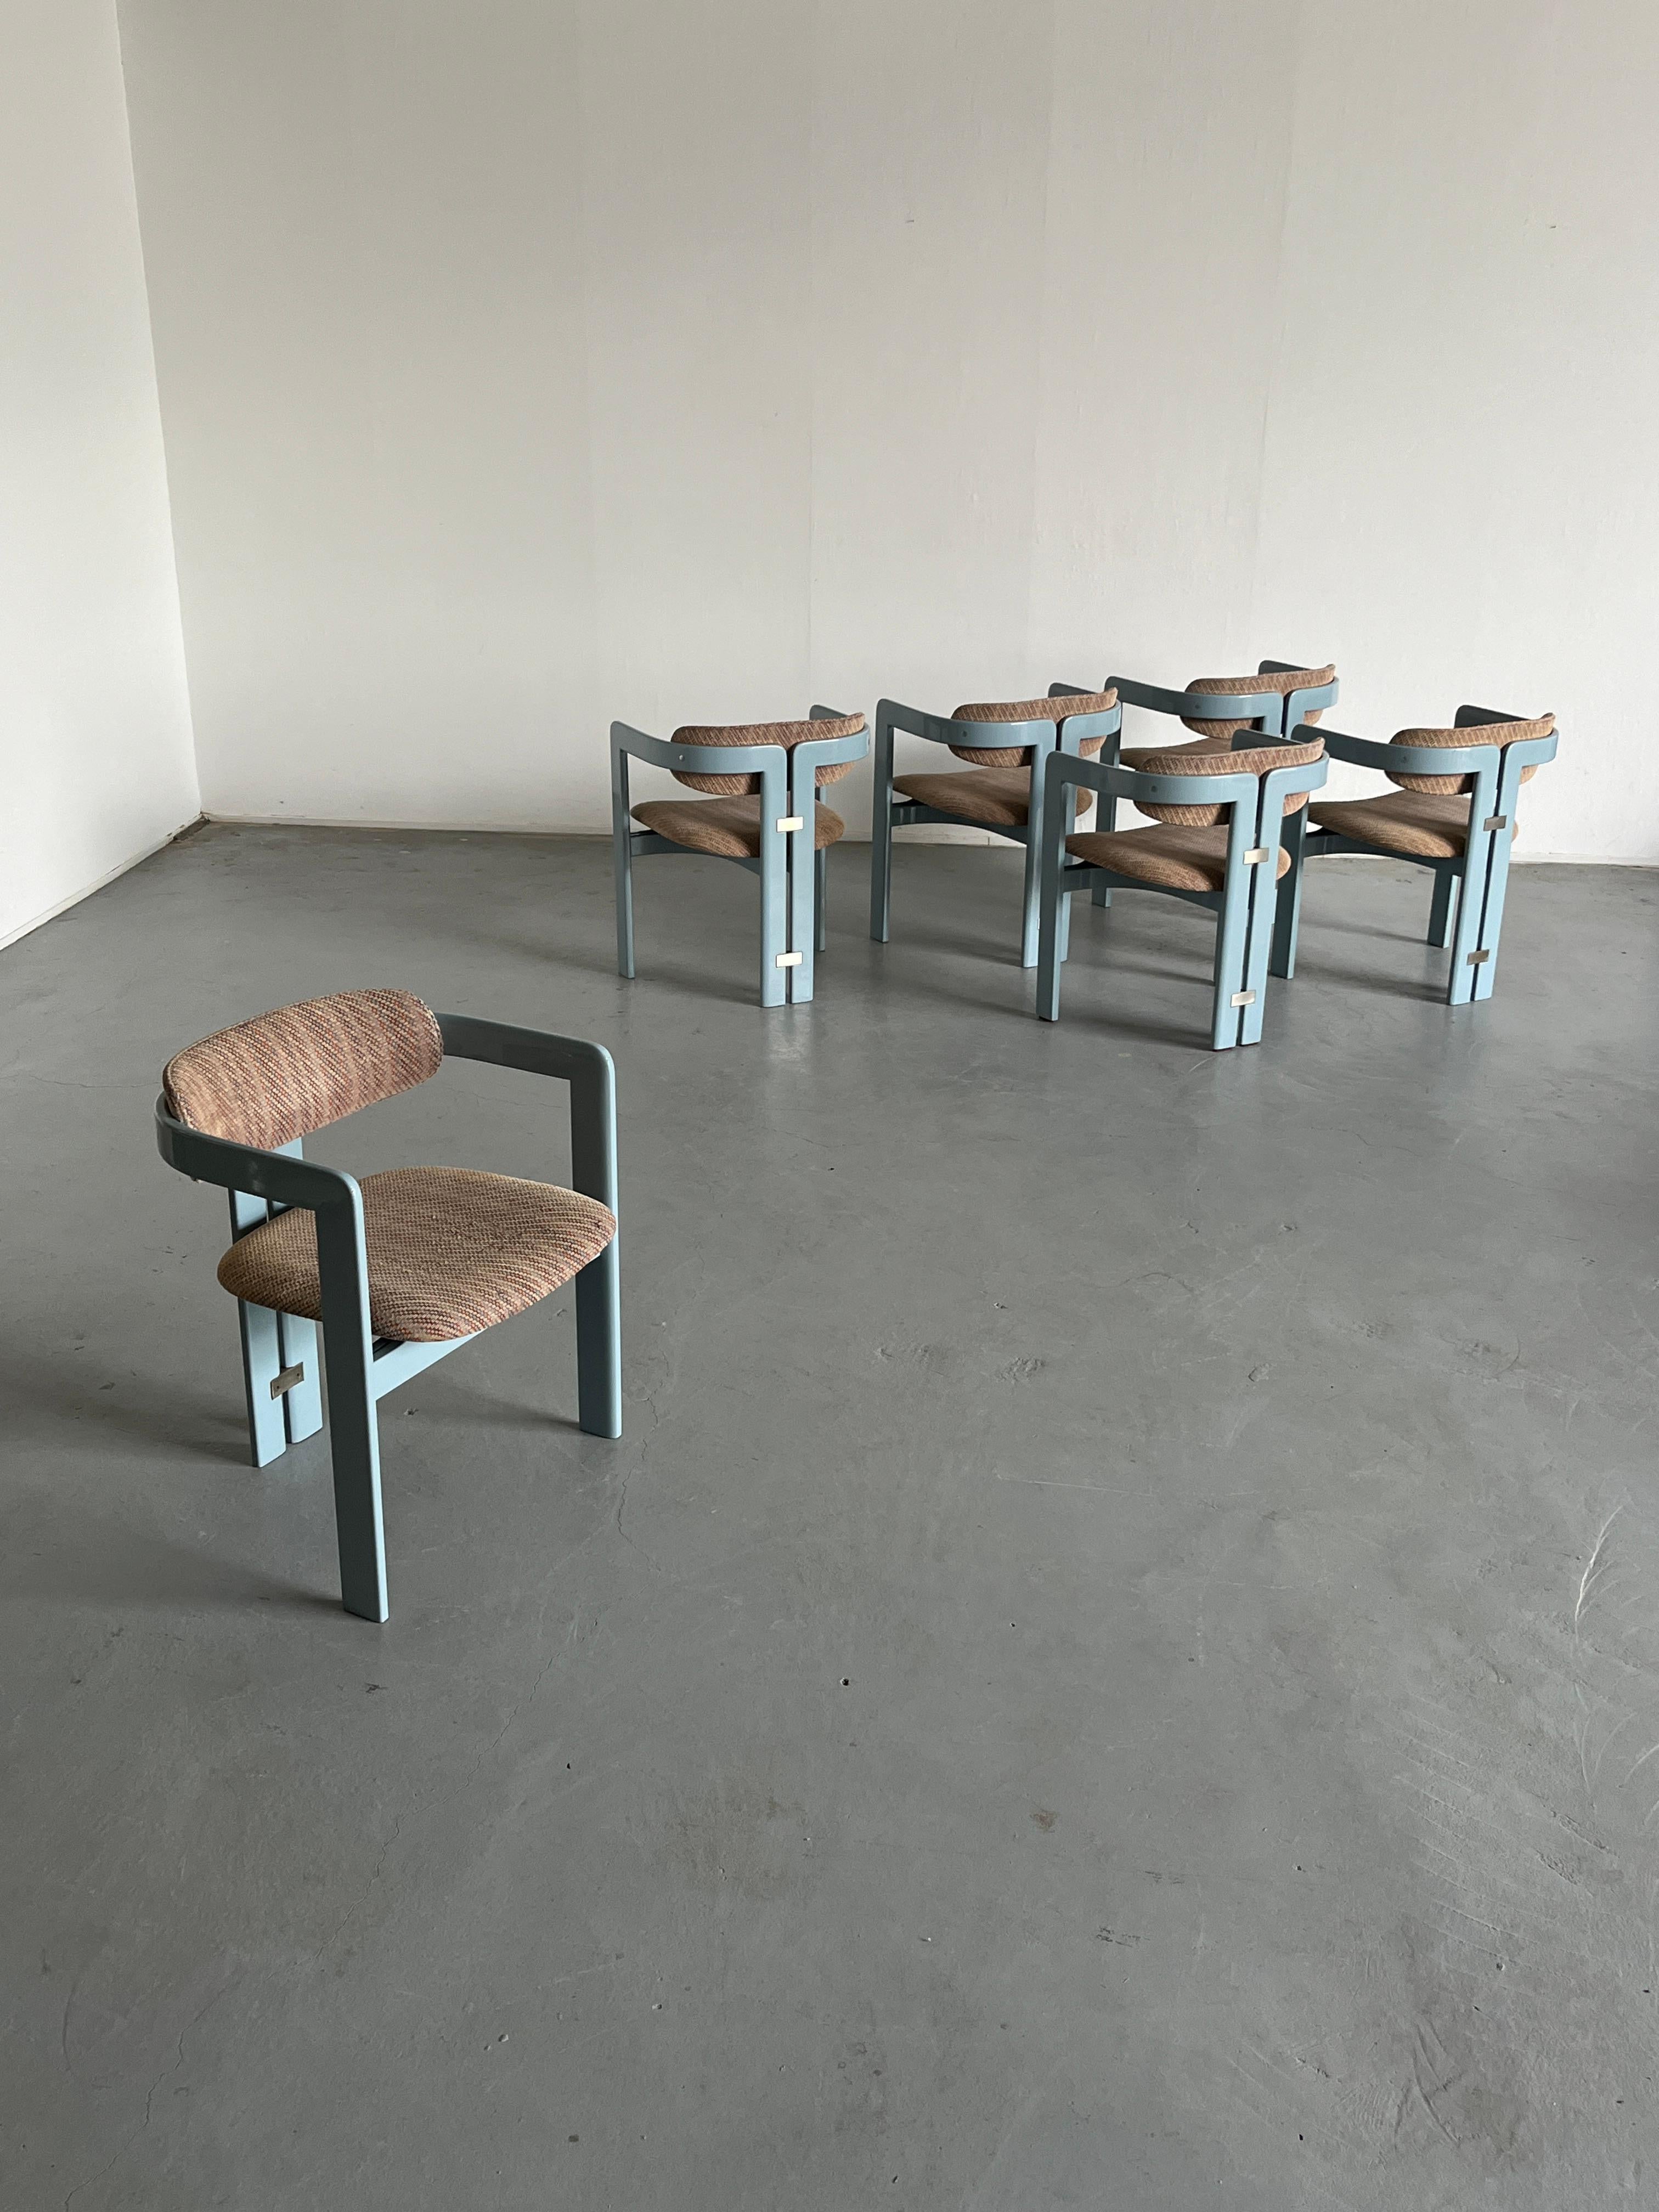 An absolute Mid-Century design classic - the original Pamplona chairs designed by the Italian architect and designer Augusto Savini for Pozzi.
In an original and rare Memphis colour combination - a light blue lacquered wooden frame, and a